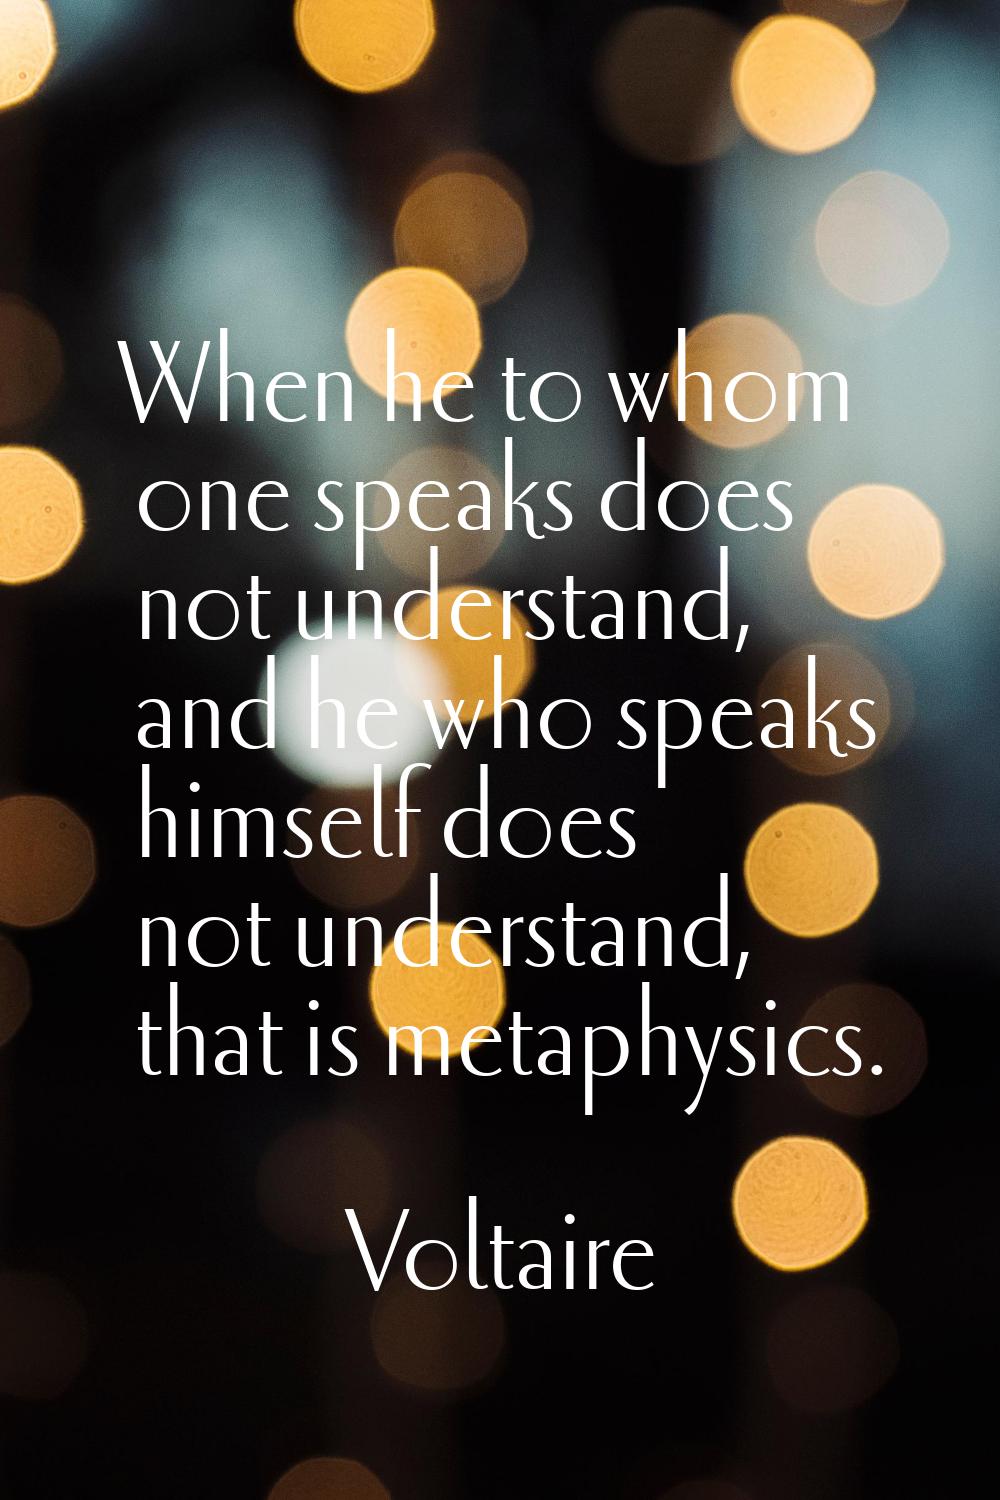 When he to whom one speaks does not understand, and he who speaks himself does not understand, that